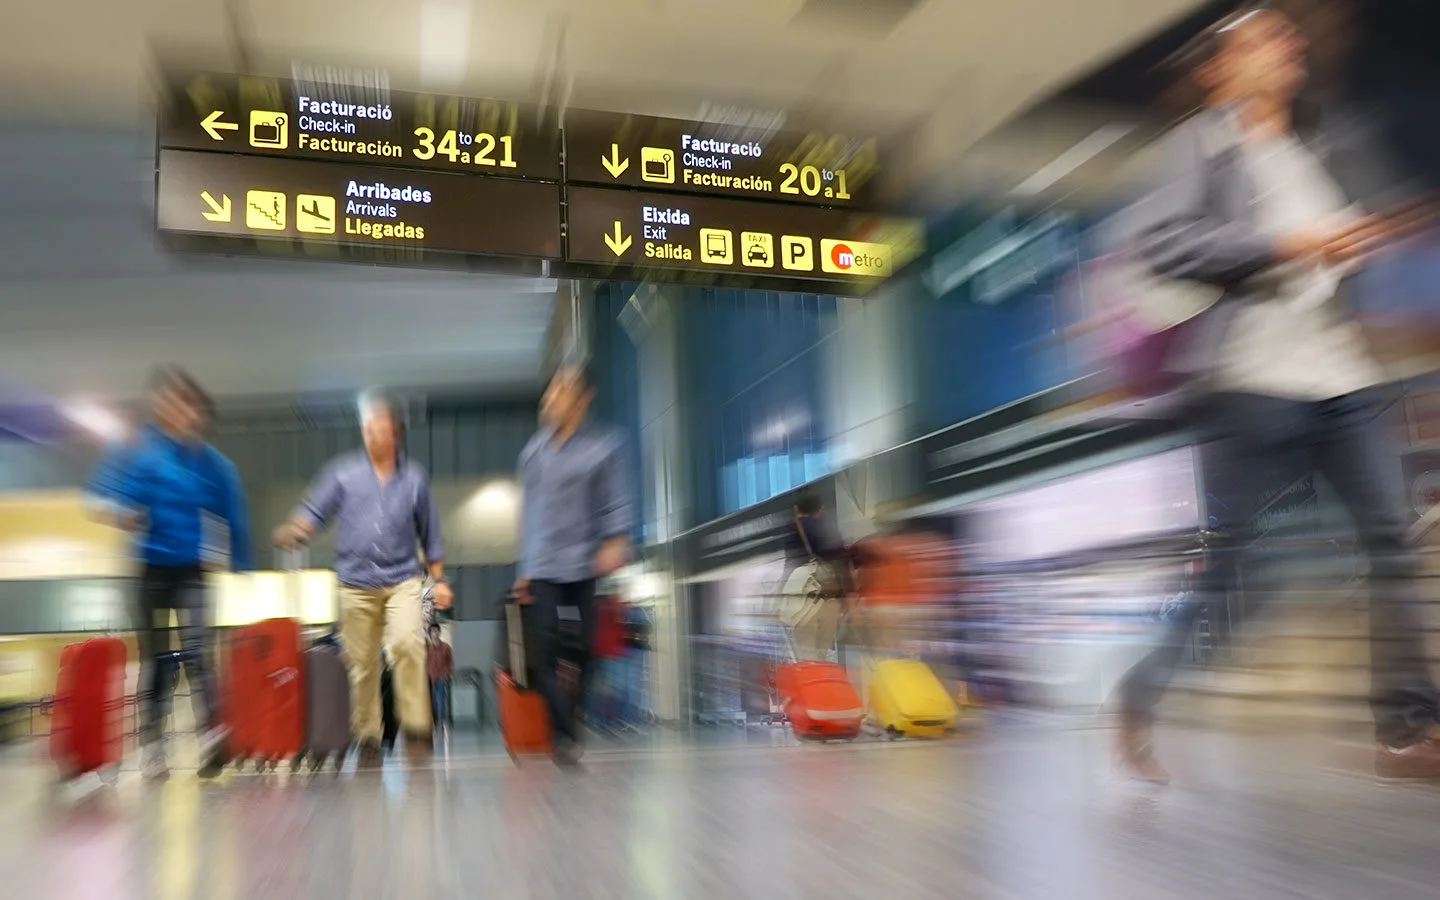 Long-exposure photo of people at an airport